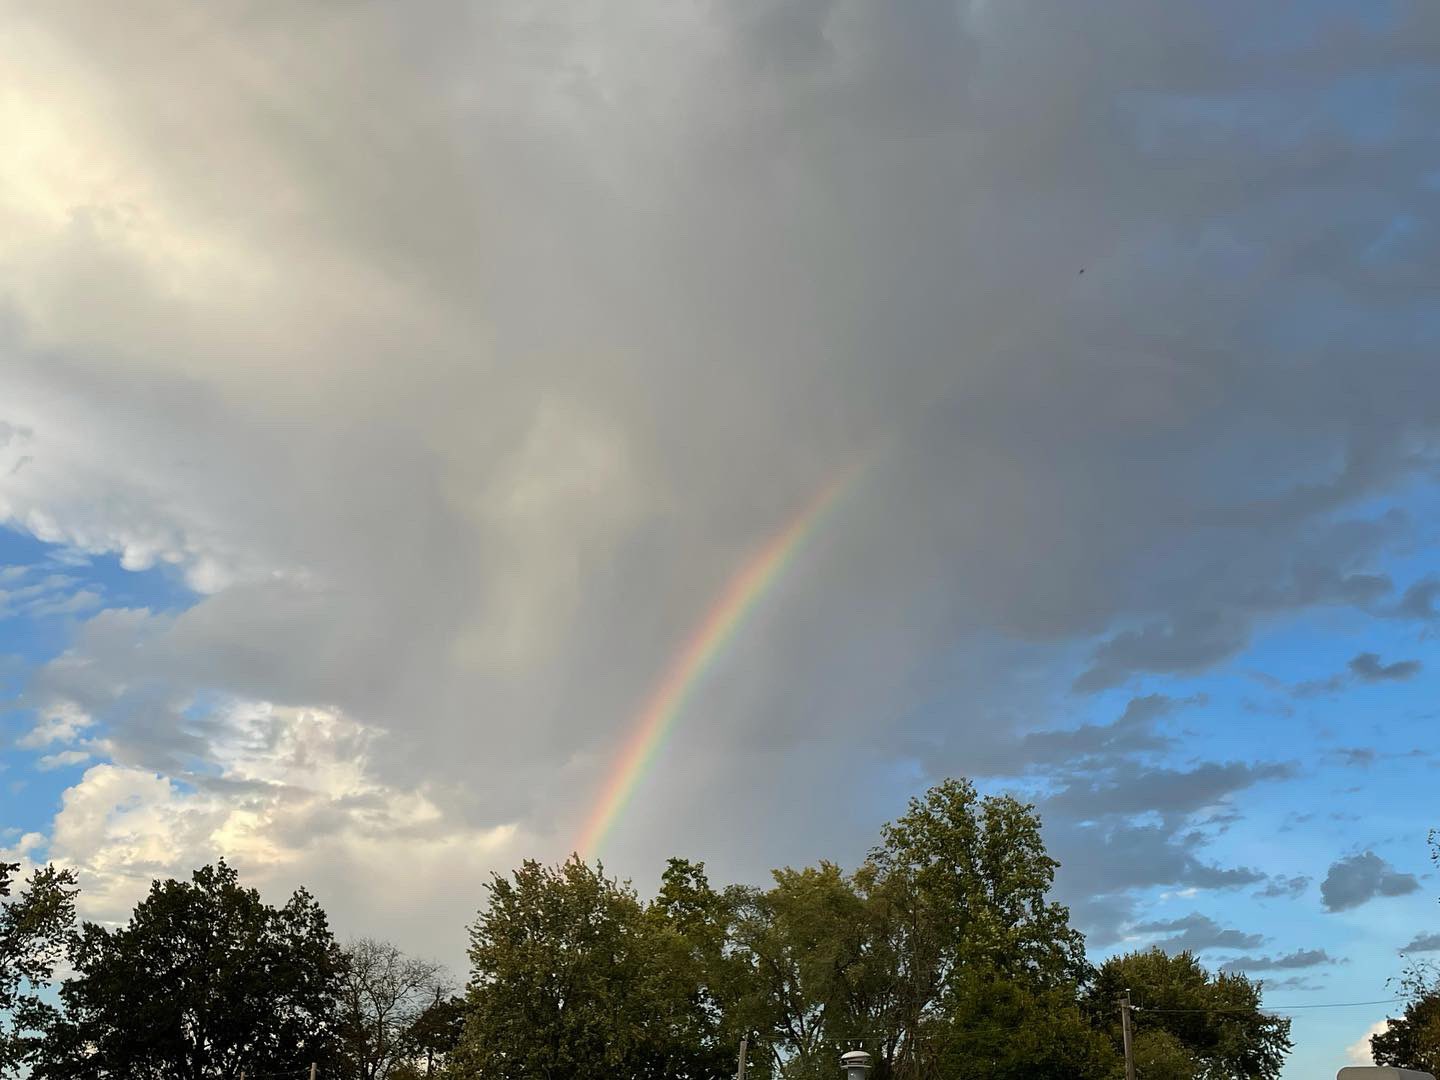 An arc of a rainbow stretches through a rain cloud then disappears behind a line of trees. Photo by Andrew Pritchard.